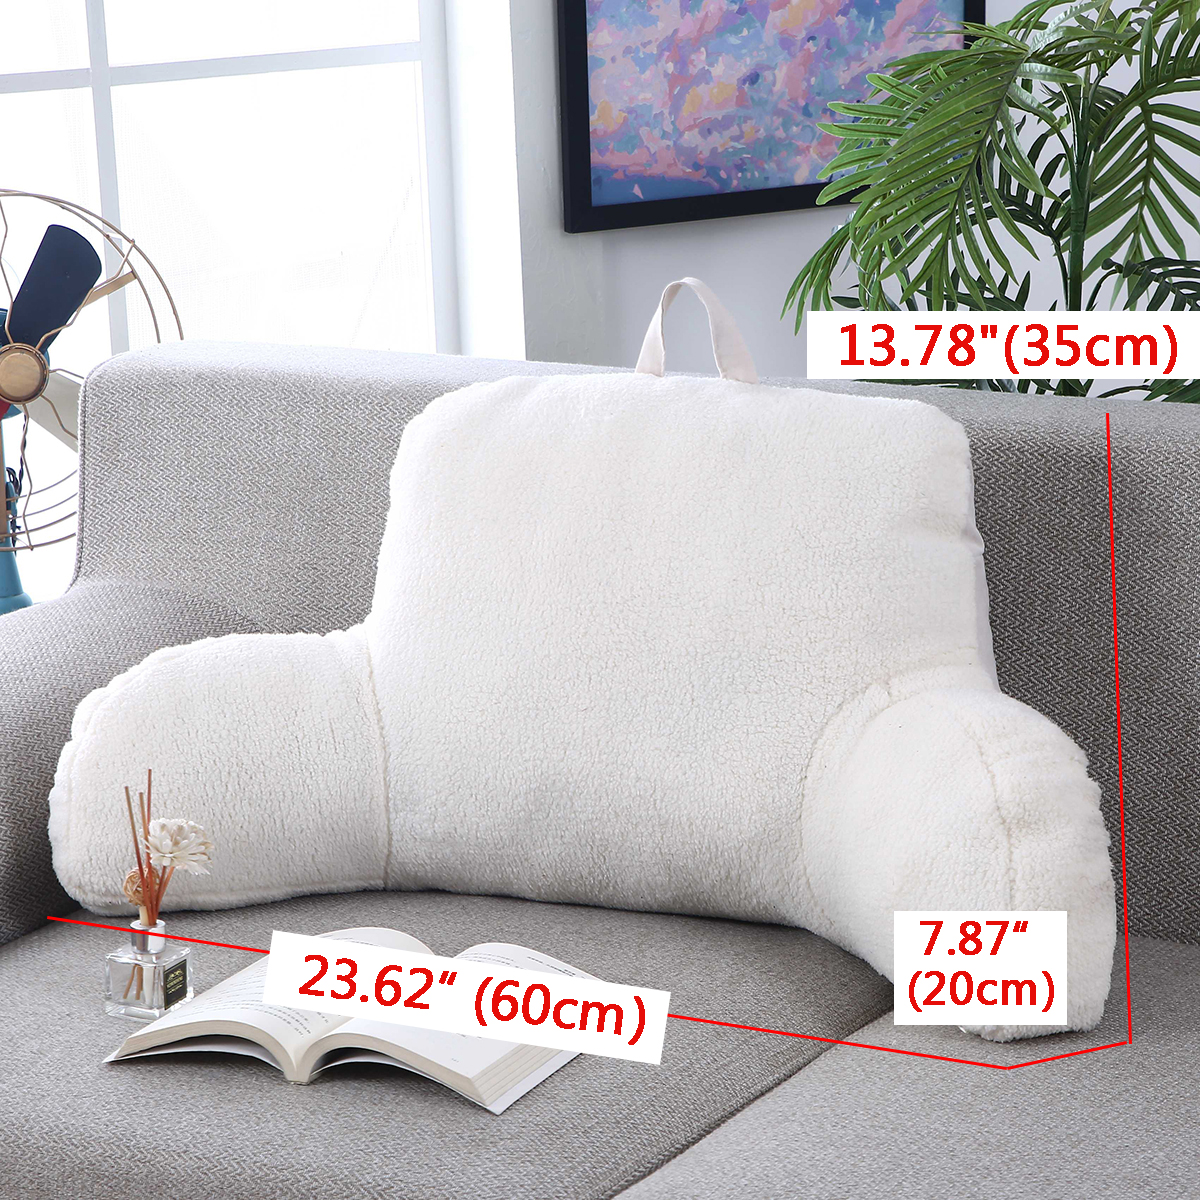 2362inch-PP-Cotton-Filling-Backrest-Pillow-Bed-Cushion-Support-Reading-Back-Rest-Arms-Chair-For-Home-1812076-5